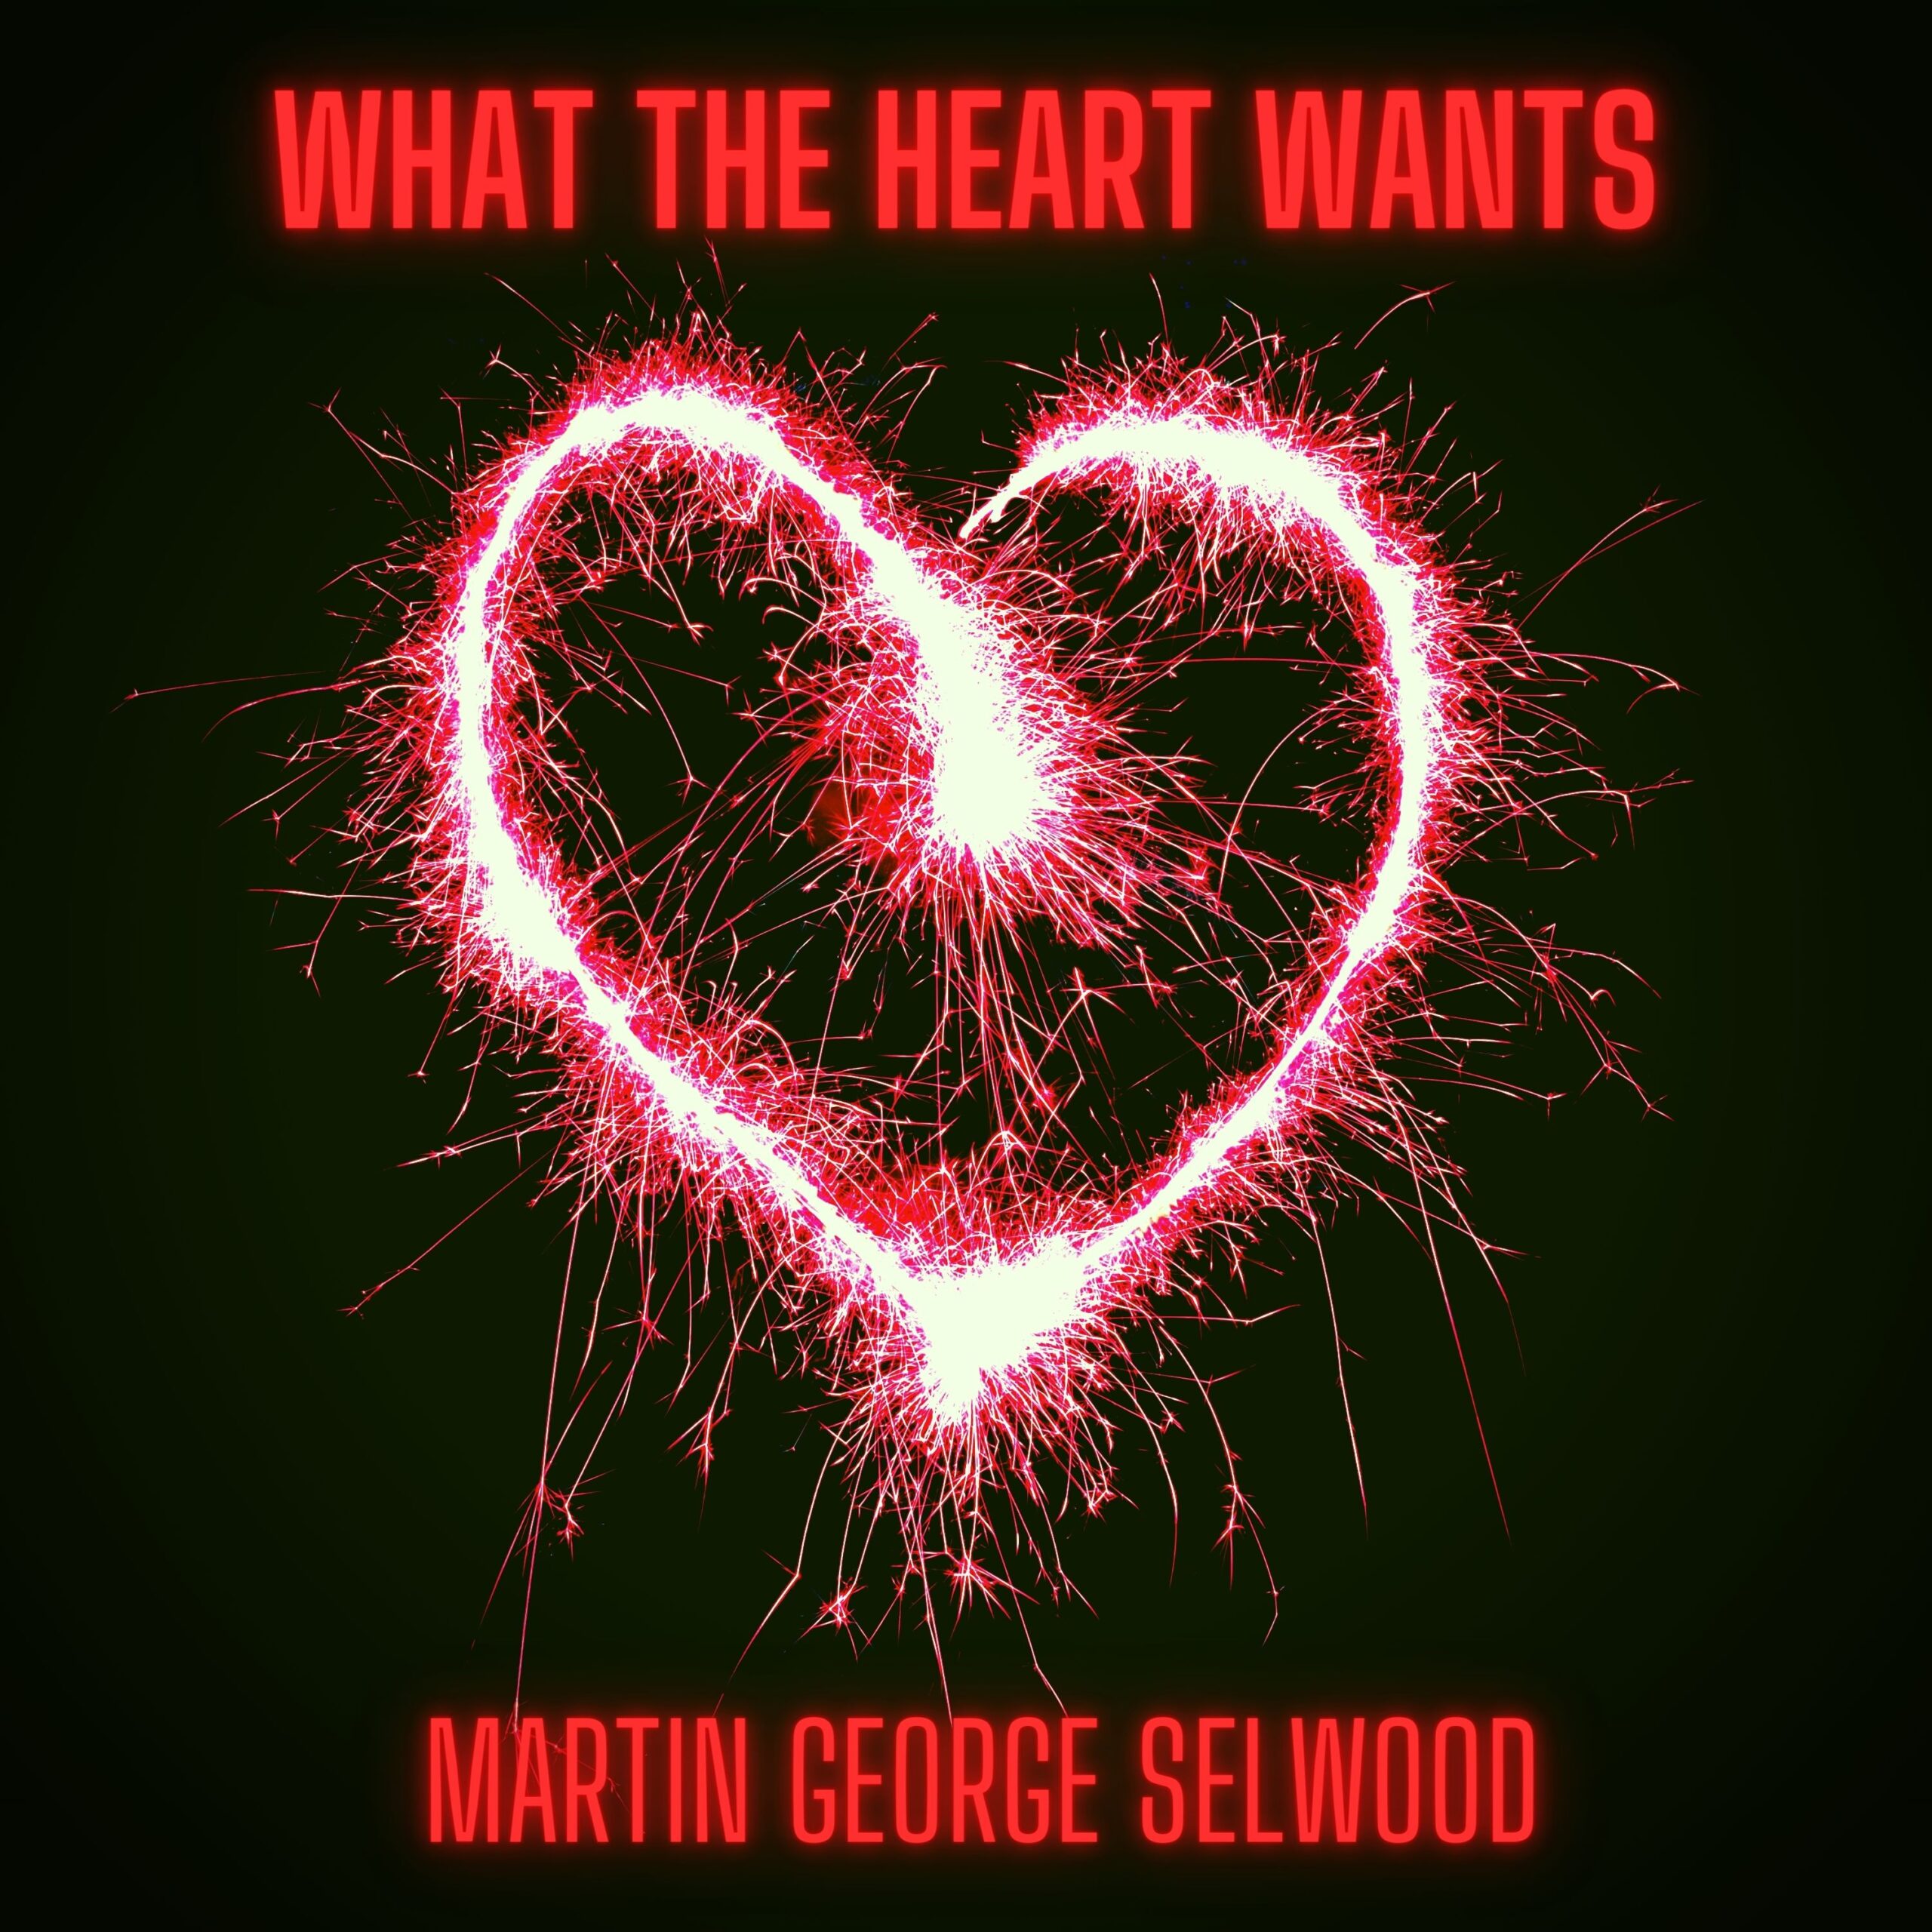 What The Heart Wants single cover of a heart created with a sparkler